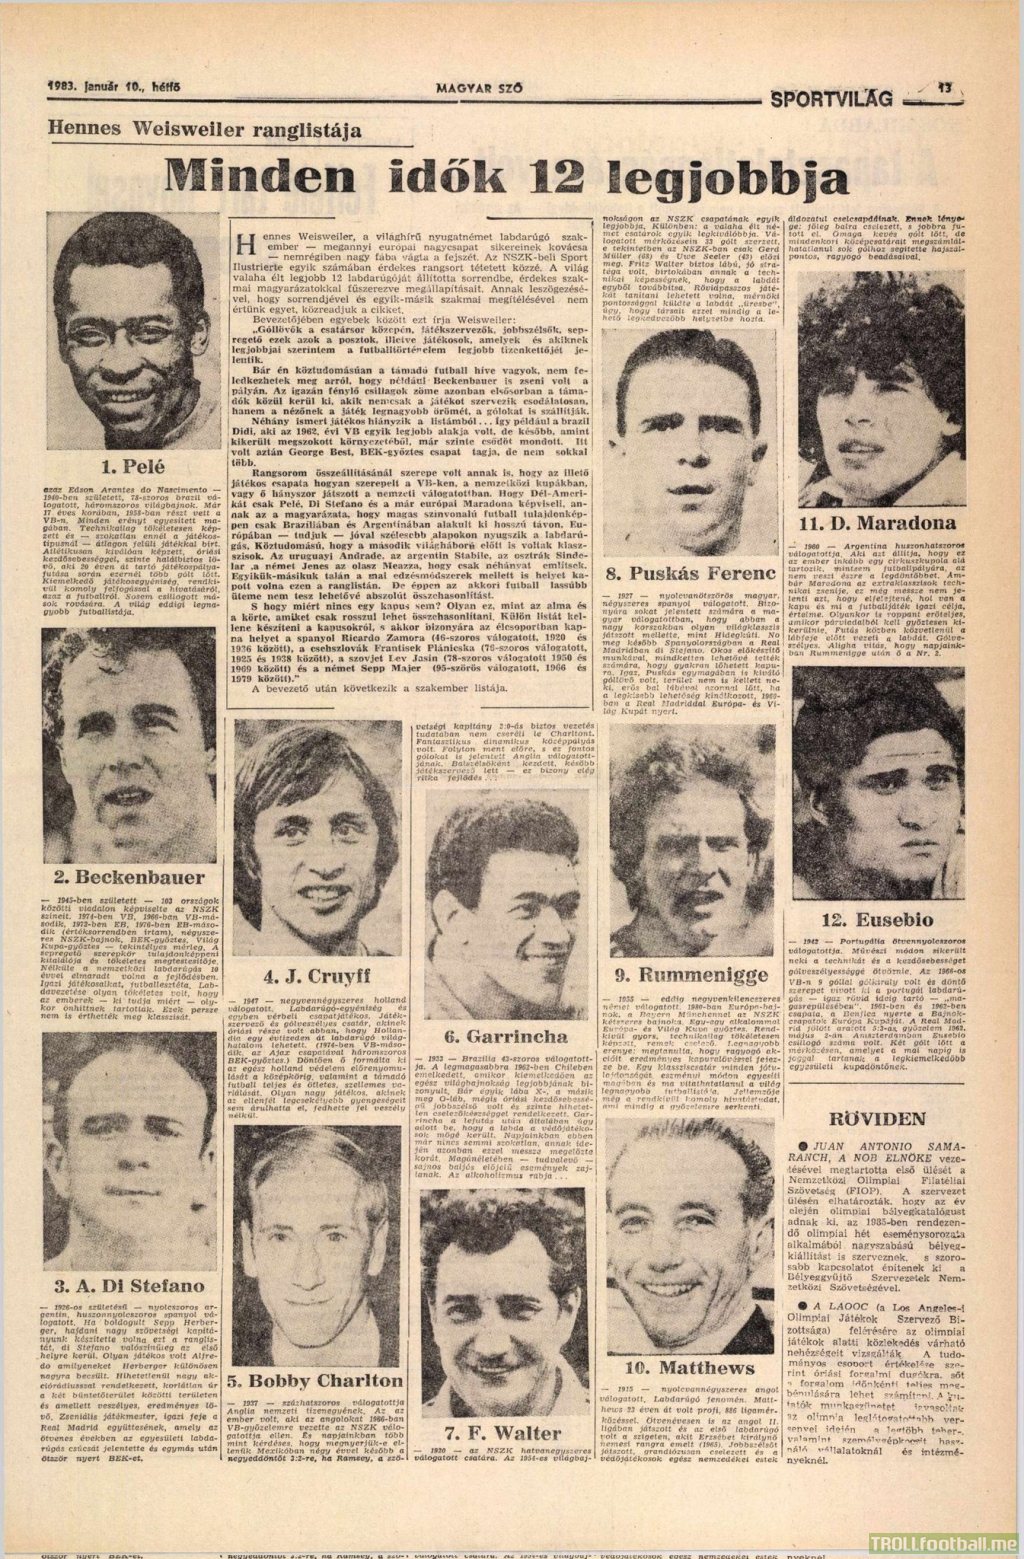 Top 12 players of all time according to Hannes Weisweller (1983)